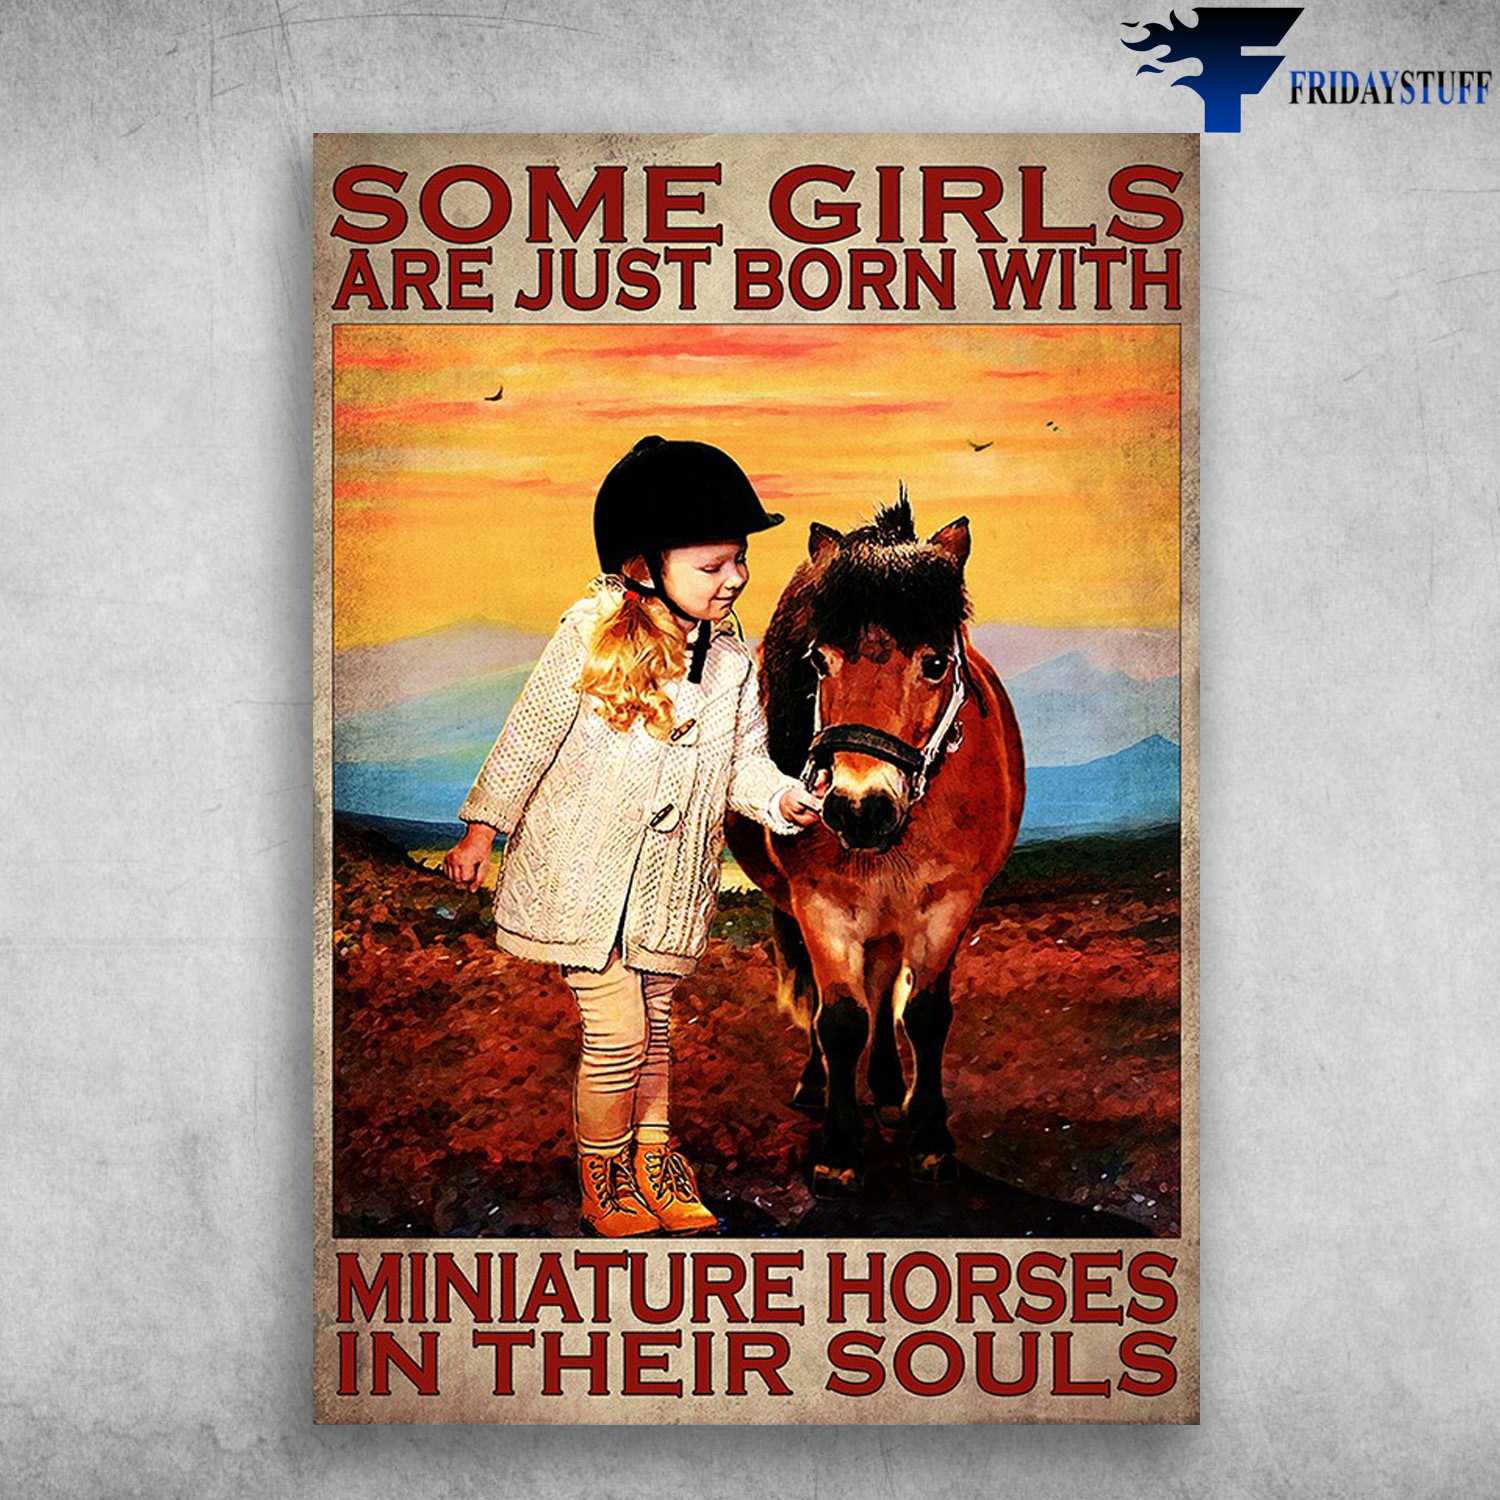 Little Girl Horse - Some Girls Are Just Born With, Miniature Horse In Their Souls